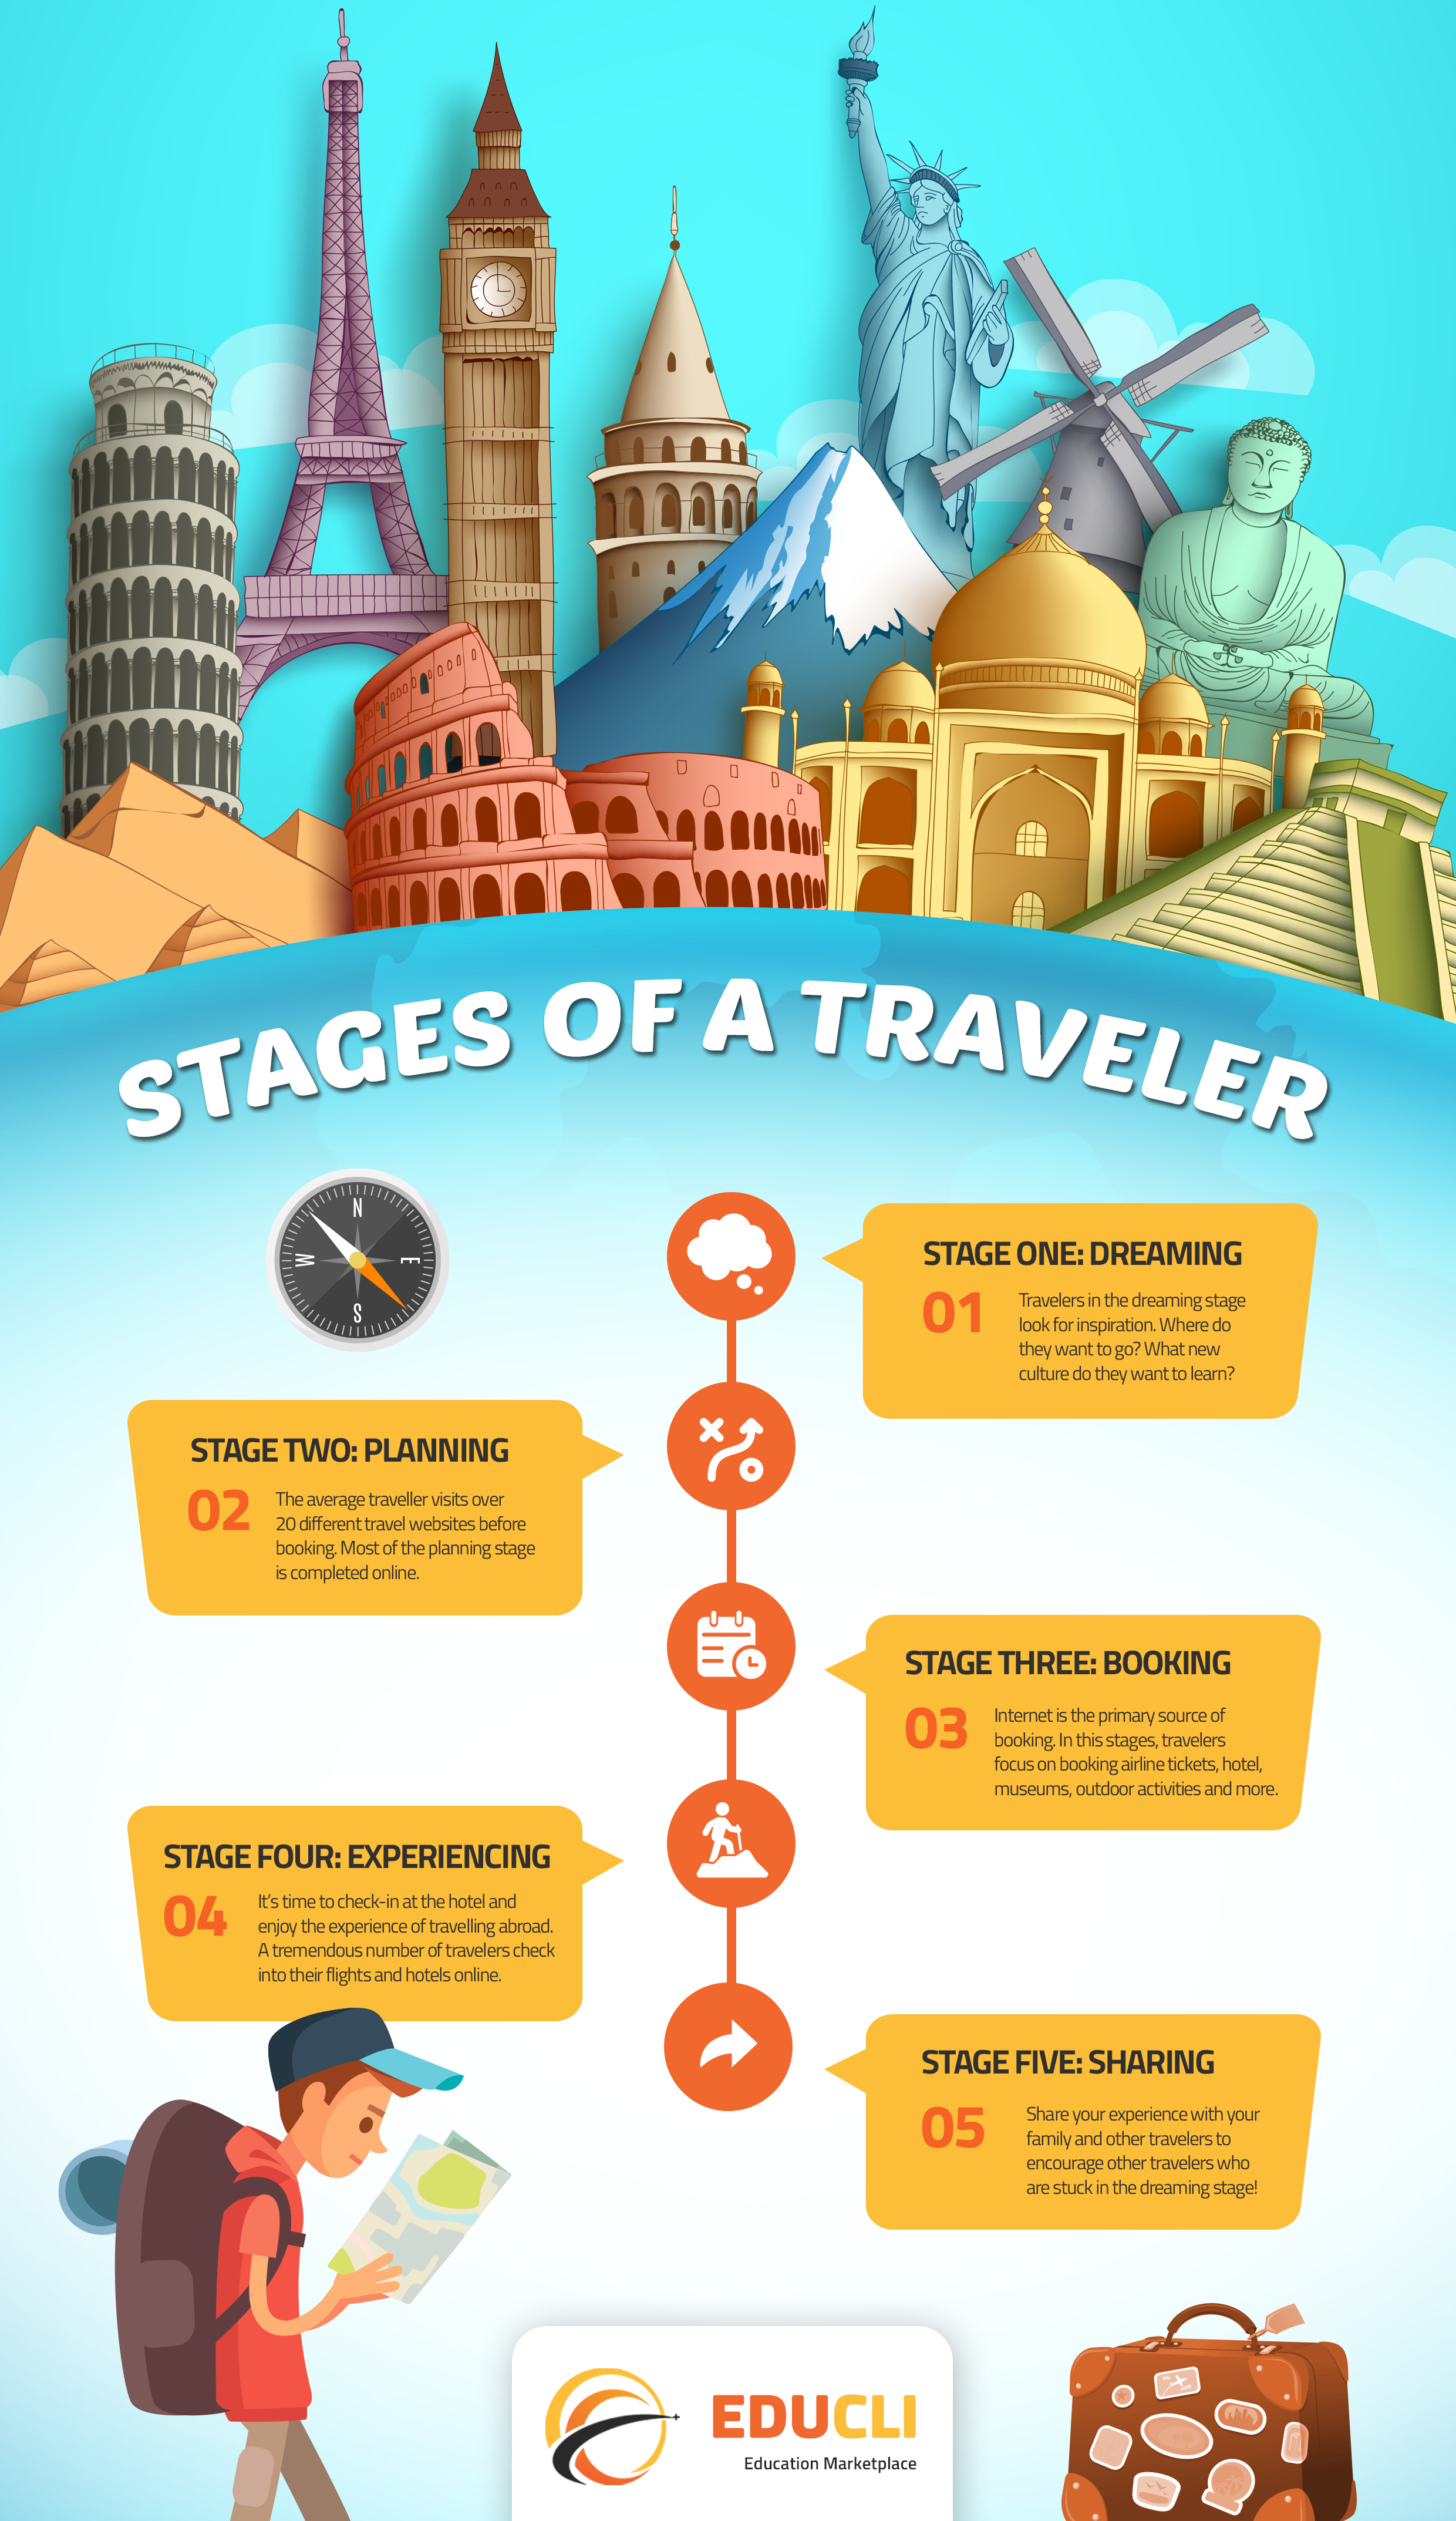 STAGES OF A TRAVELER